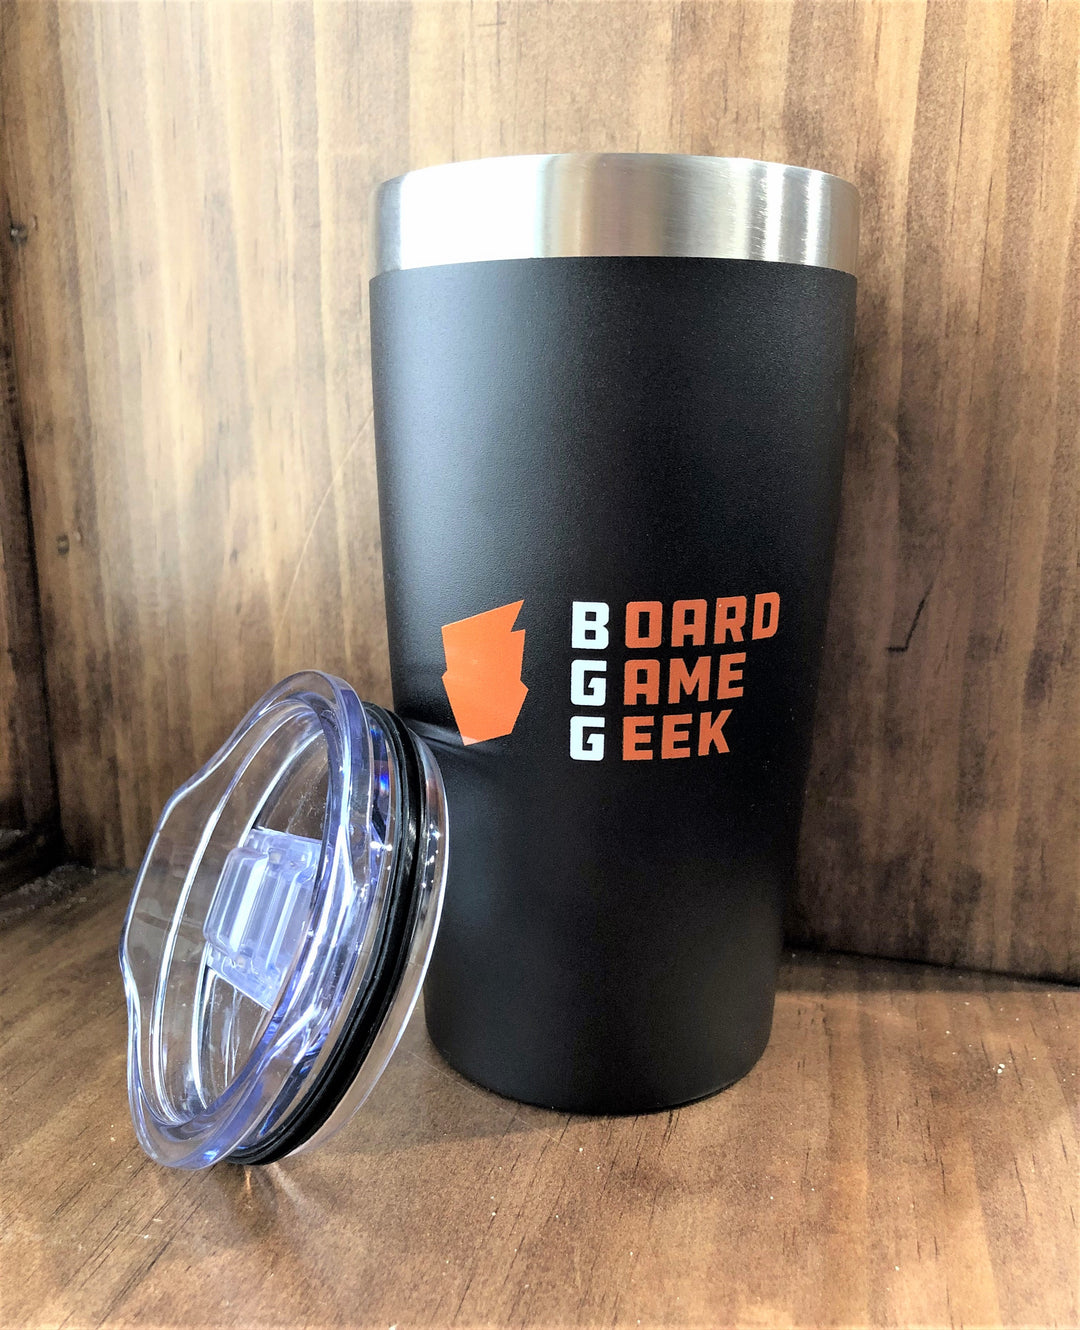 A black and silver travel mug sitting on a wooden background, with a clear, push top resting on the side. The mug is decorated with an orange logo and the words "BoardGameGeek".